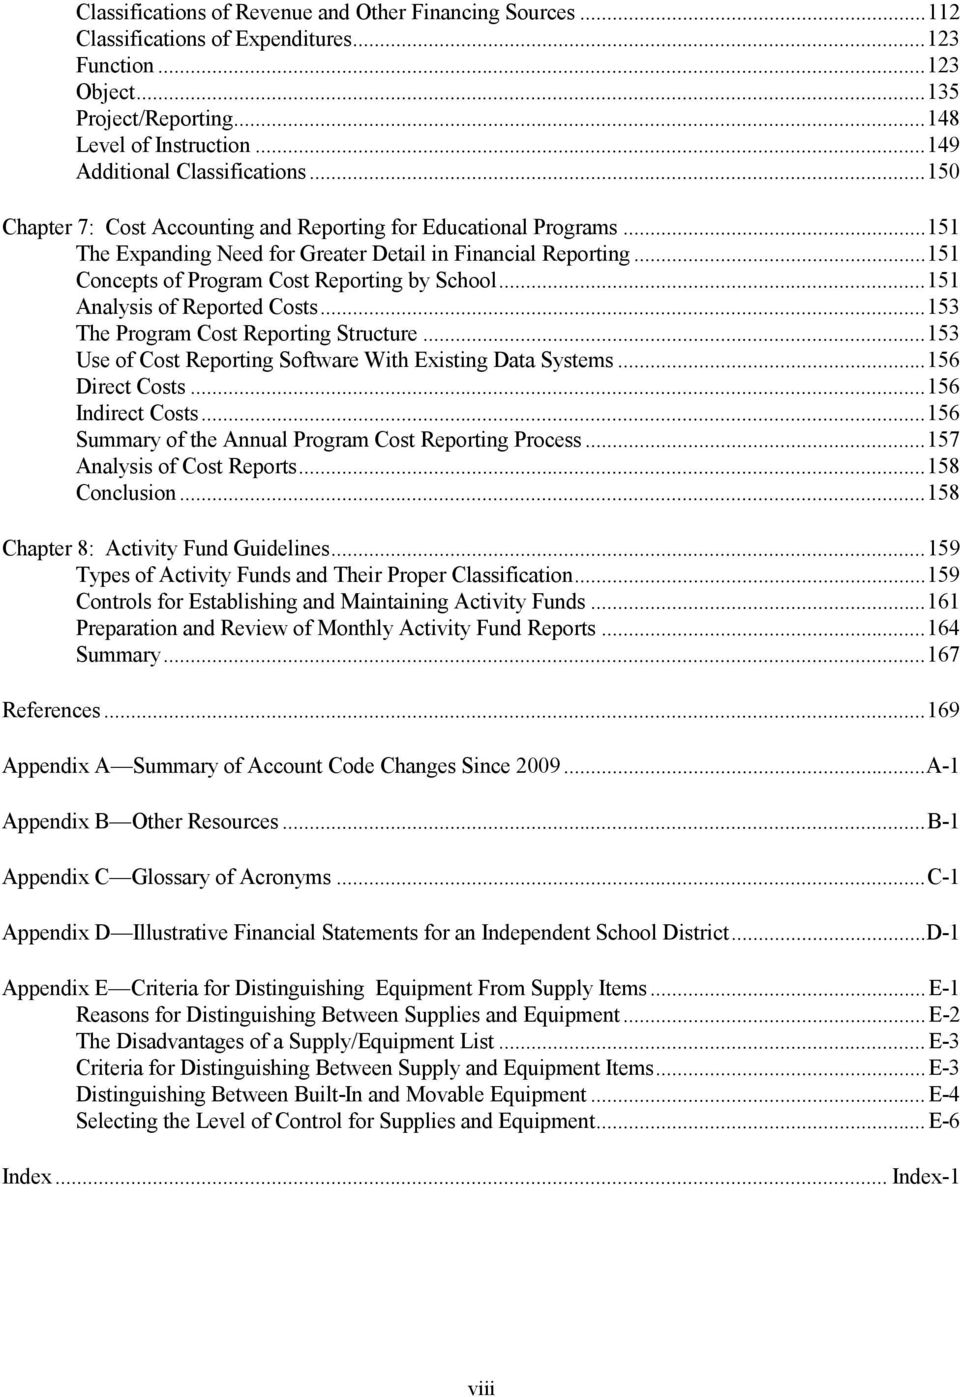 .. 151 Concepts of Program Cost Reporting by School... 151 Analysis of Reported Costs... 153 The Program Cost Reporting Structure... 153 Use of Cost Reporting Software With Existing Data Systems.